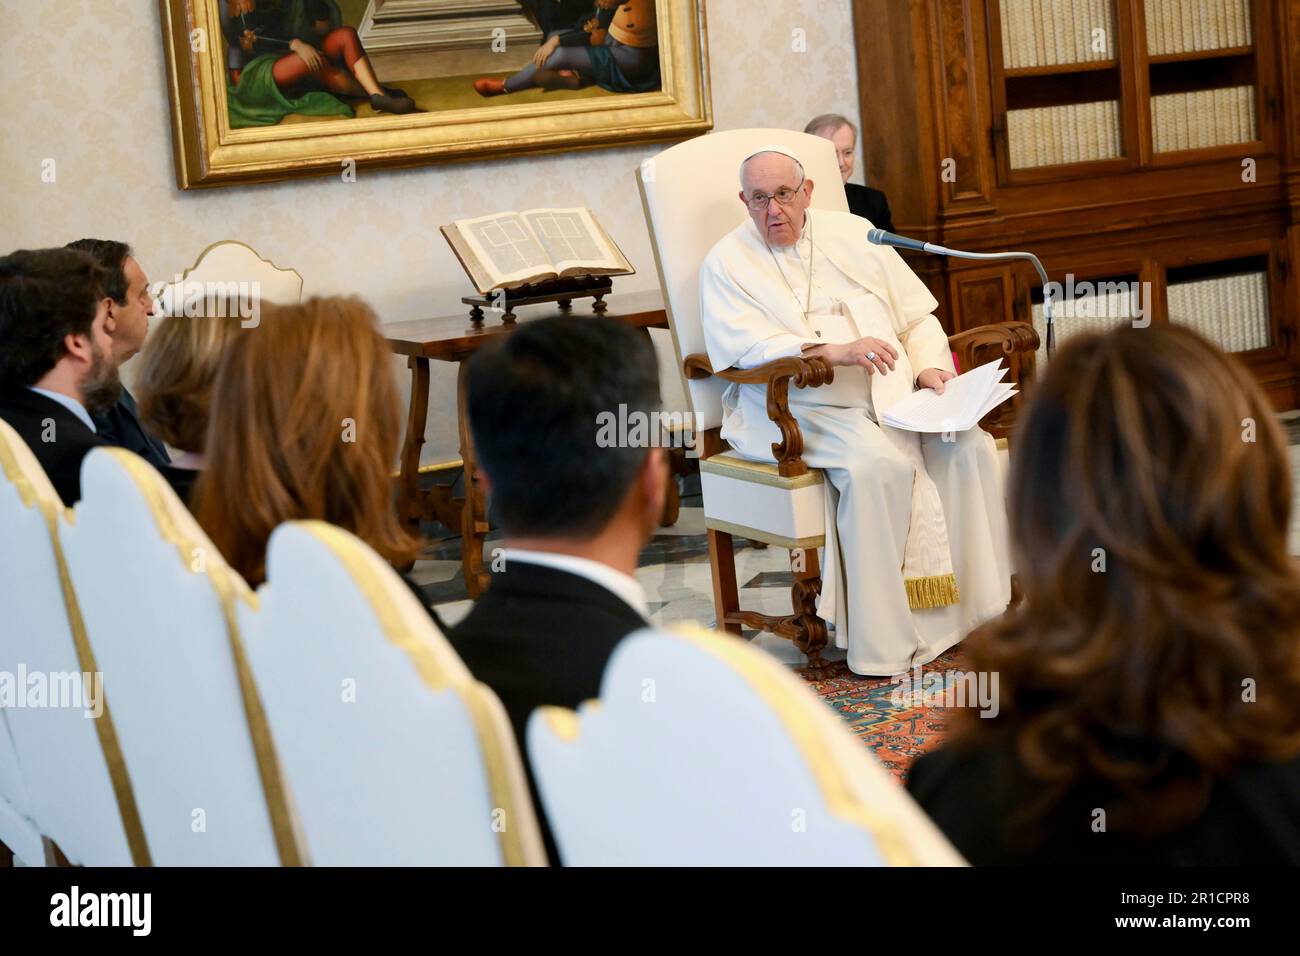 Vatican, Vatican. 13th May, 2023. Italy, Rome, Vatican, 2023/5/13 . Pope Francis receives in audience the Members of the Asociacion Agraria Jovenes Agricultores at the Vatican Photograph by Vatican Media /Catholic Press Photo . RESTRICTED TO EDITORIAL USE - NO MARKETING - NO ADVERTISING CAMPAIGNS. Credit: Independent Photo Agency/Alamy Live News Stock Photo